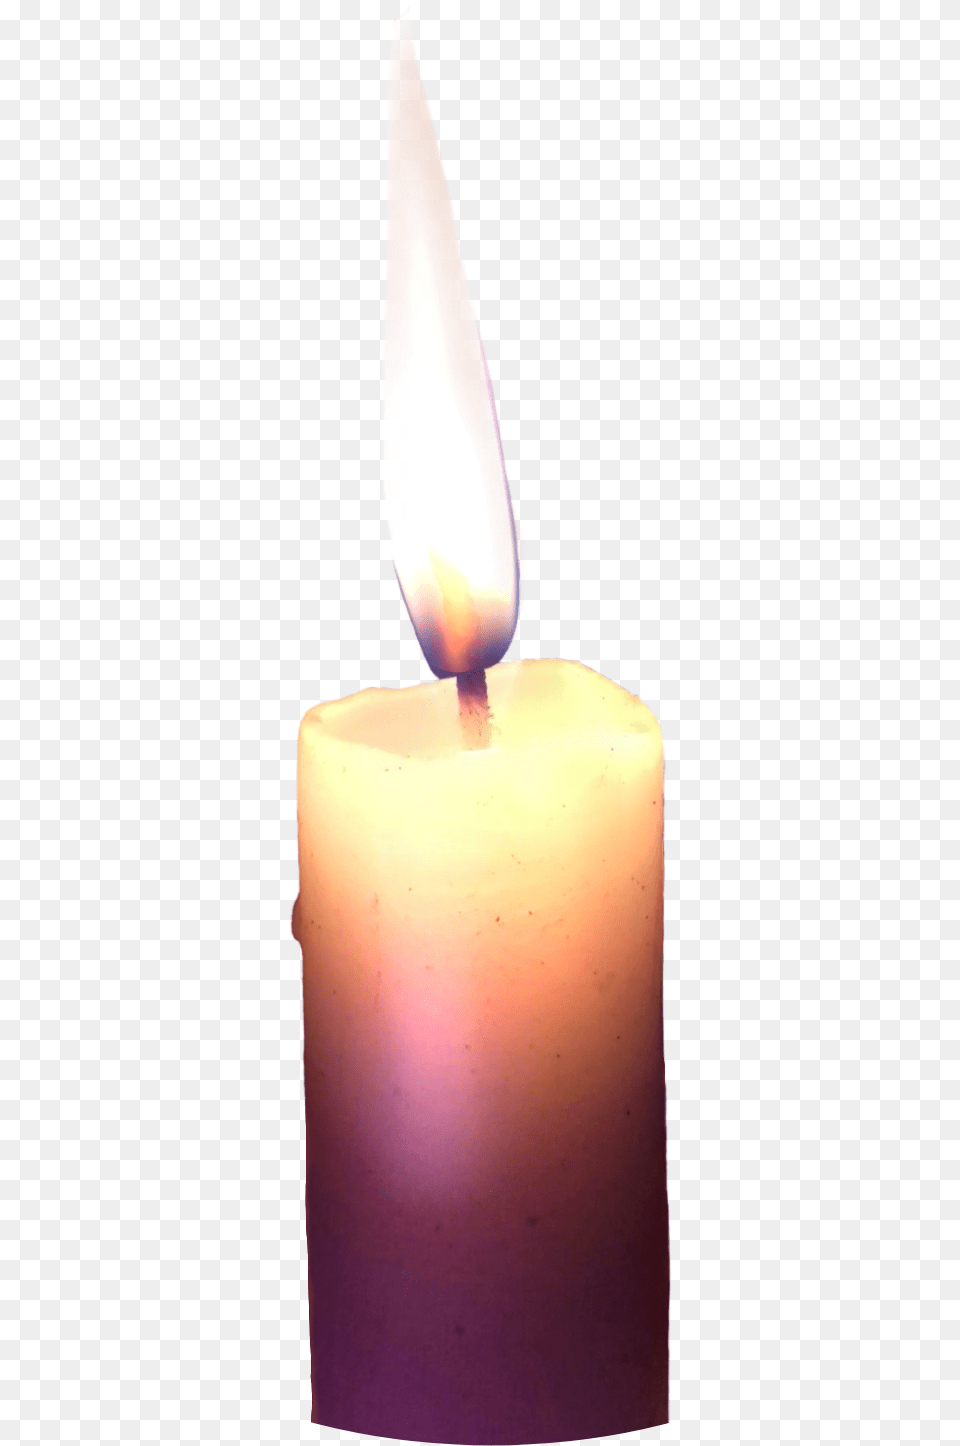 Candle Flame Light Night Real Original Photograph, Fire Free Png Download